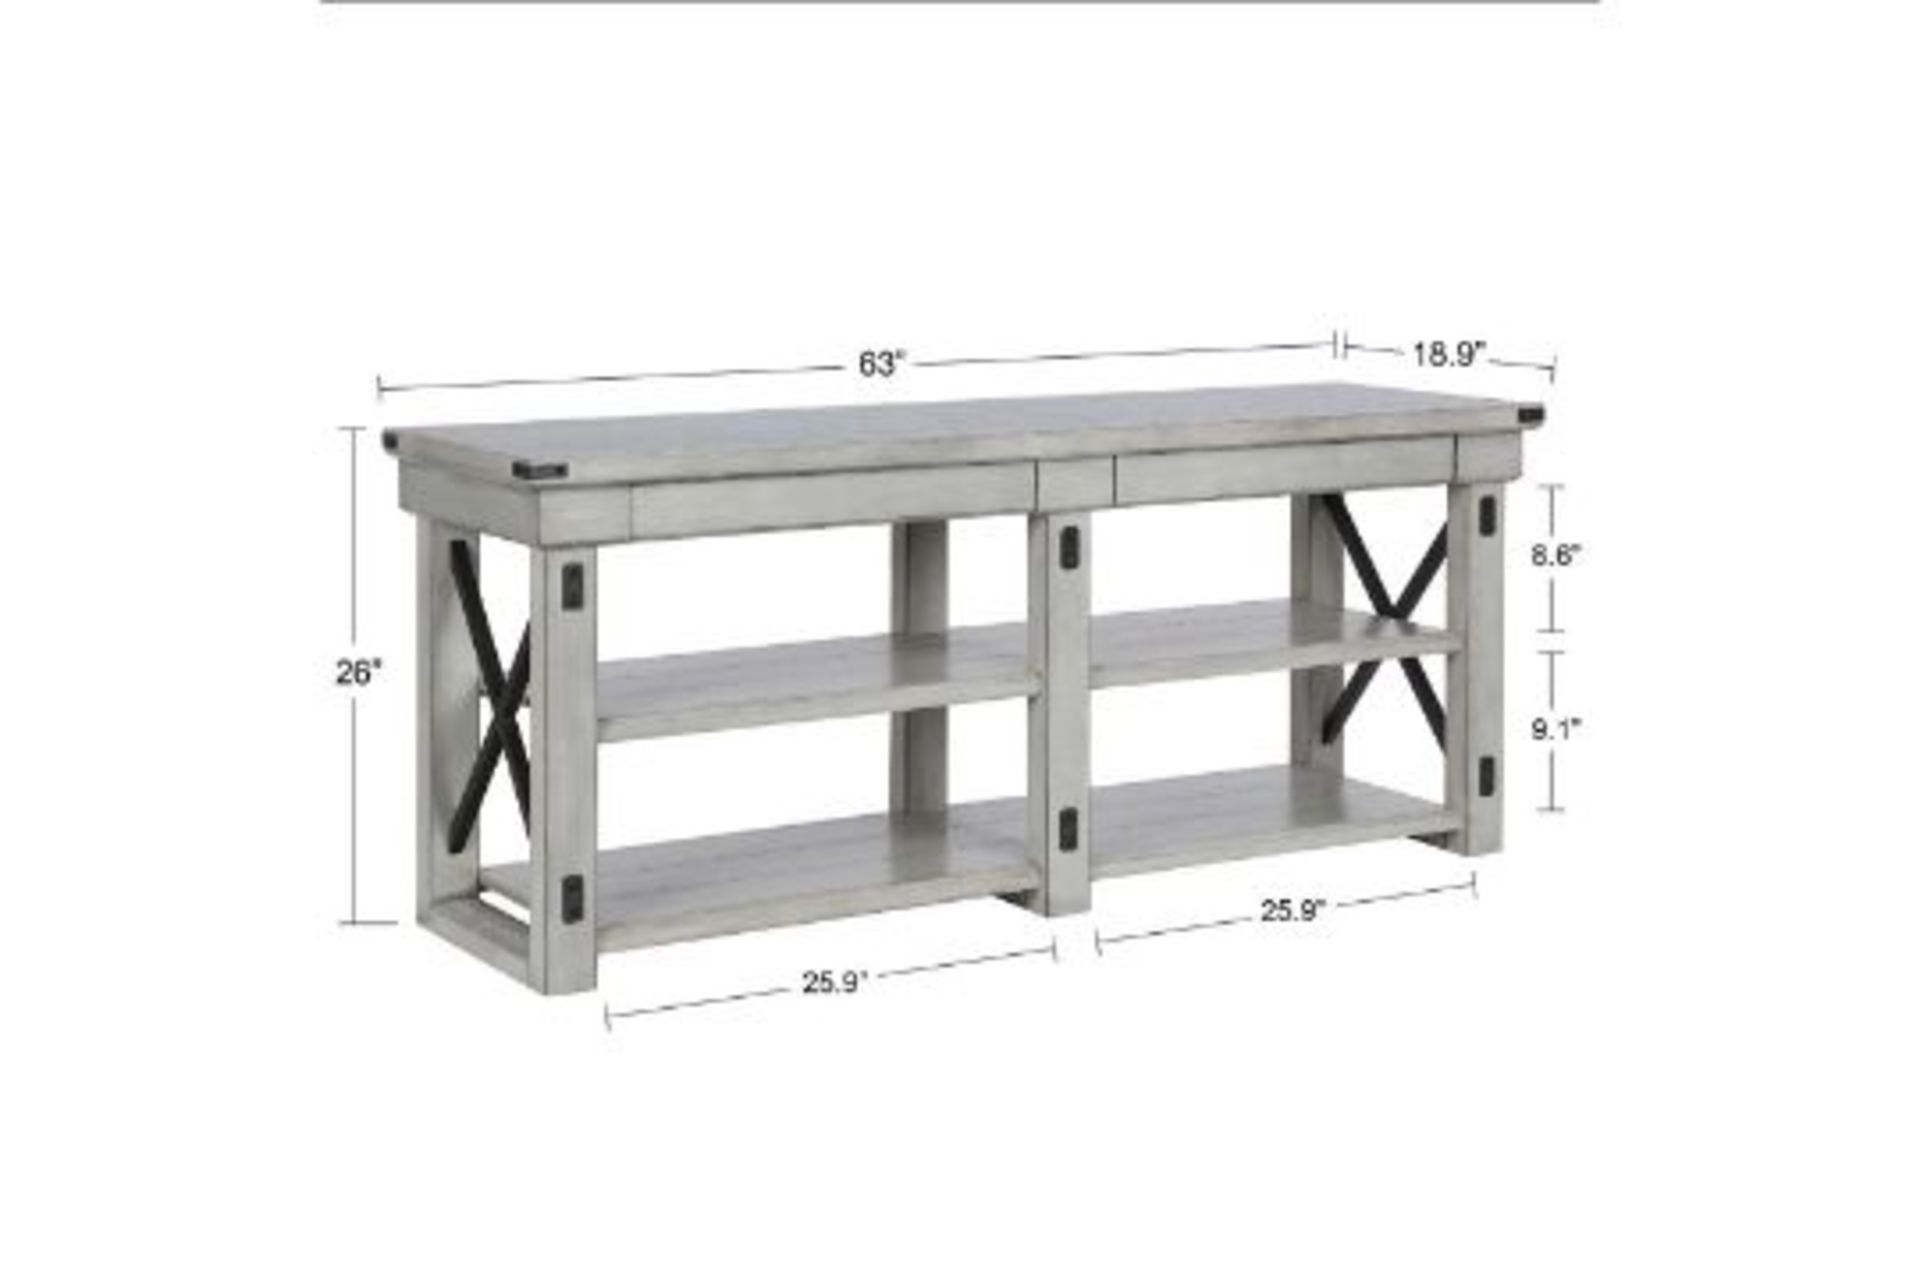 BRAND NEW DOREL HOME PRODUCTS DOREL WILDWOOD VENEER TV STAND (65") rustic white (db) 1768296COM - Image 2 of 2